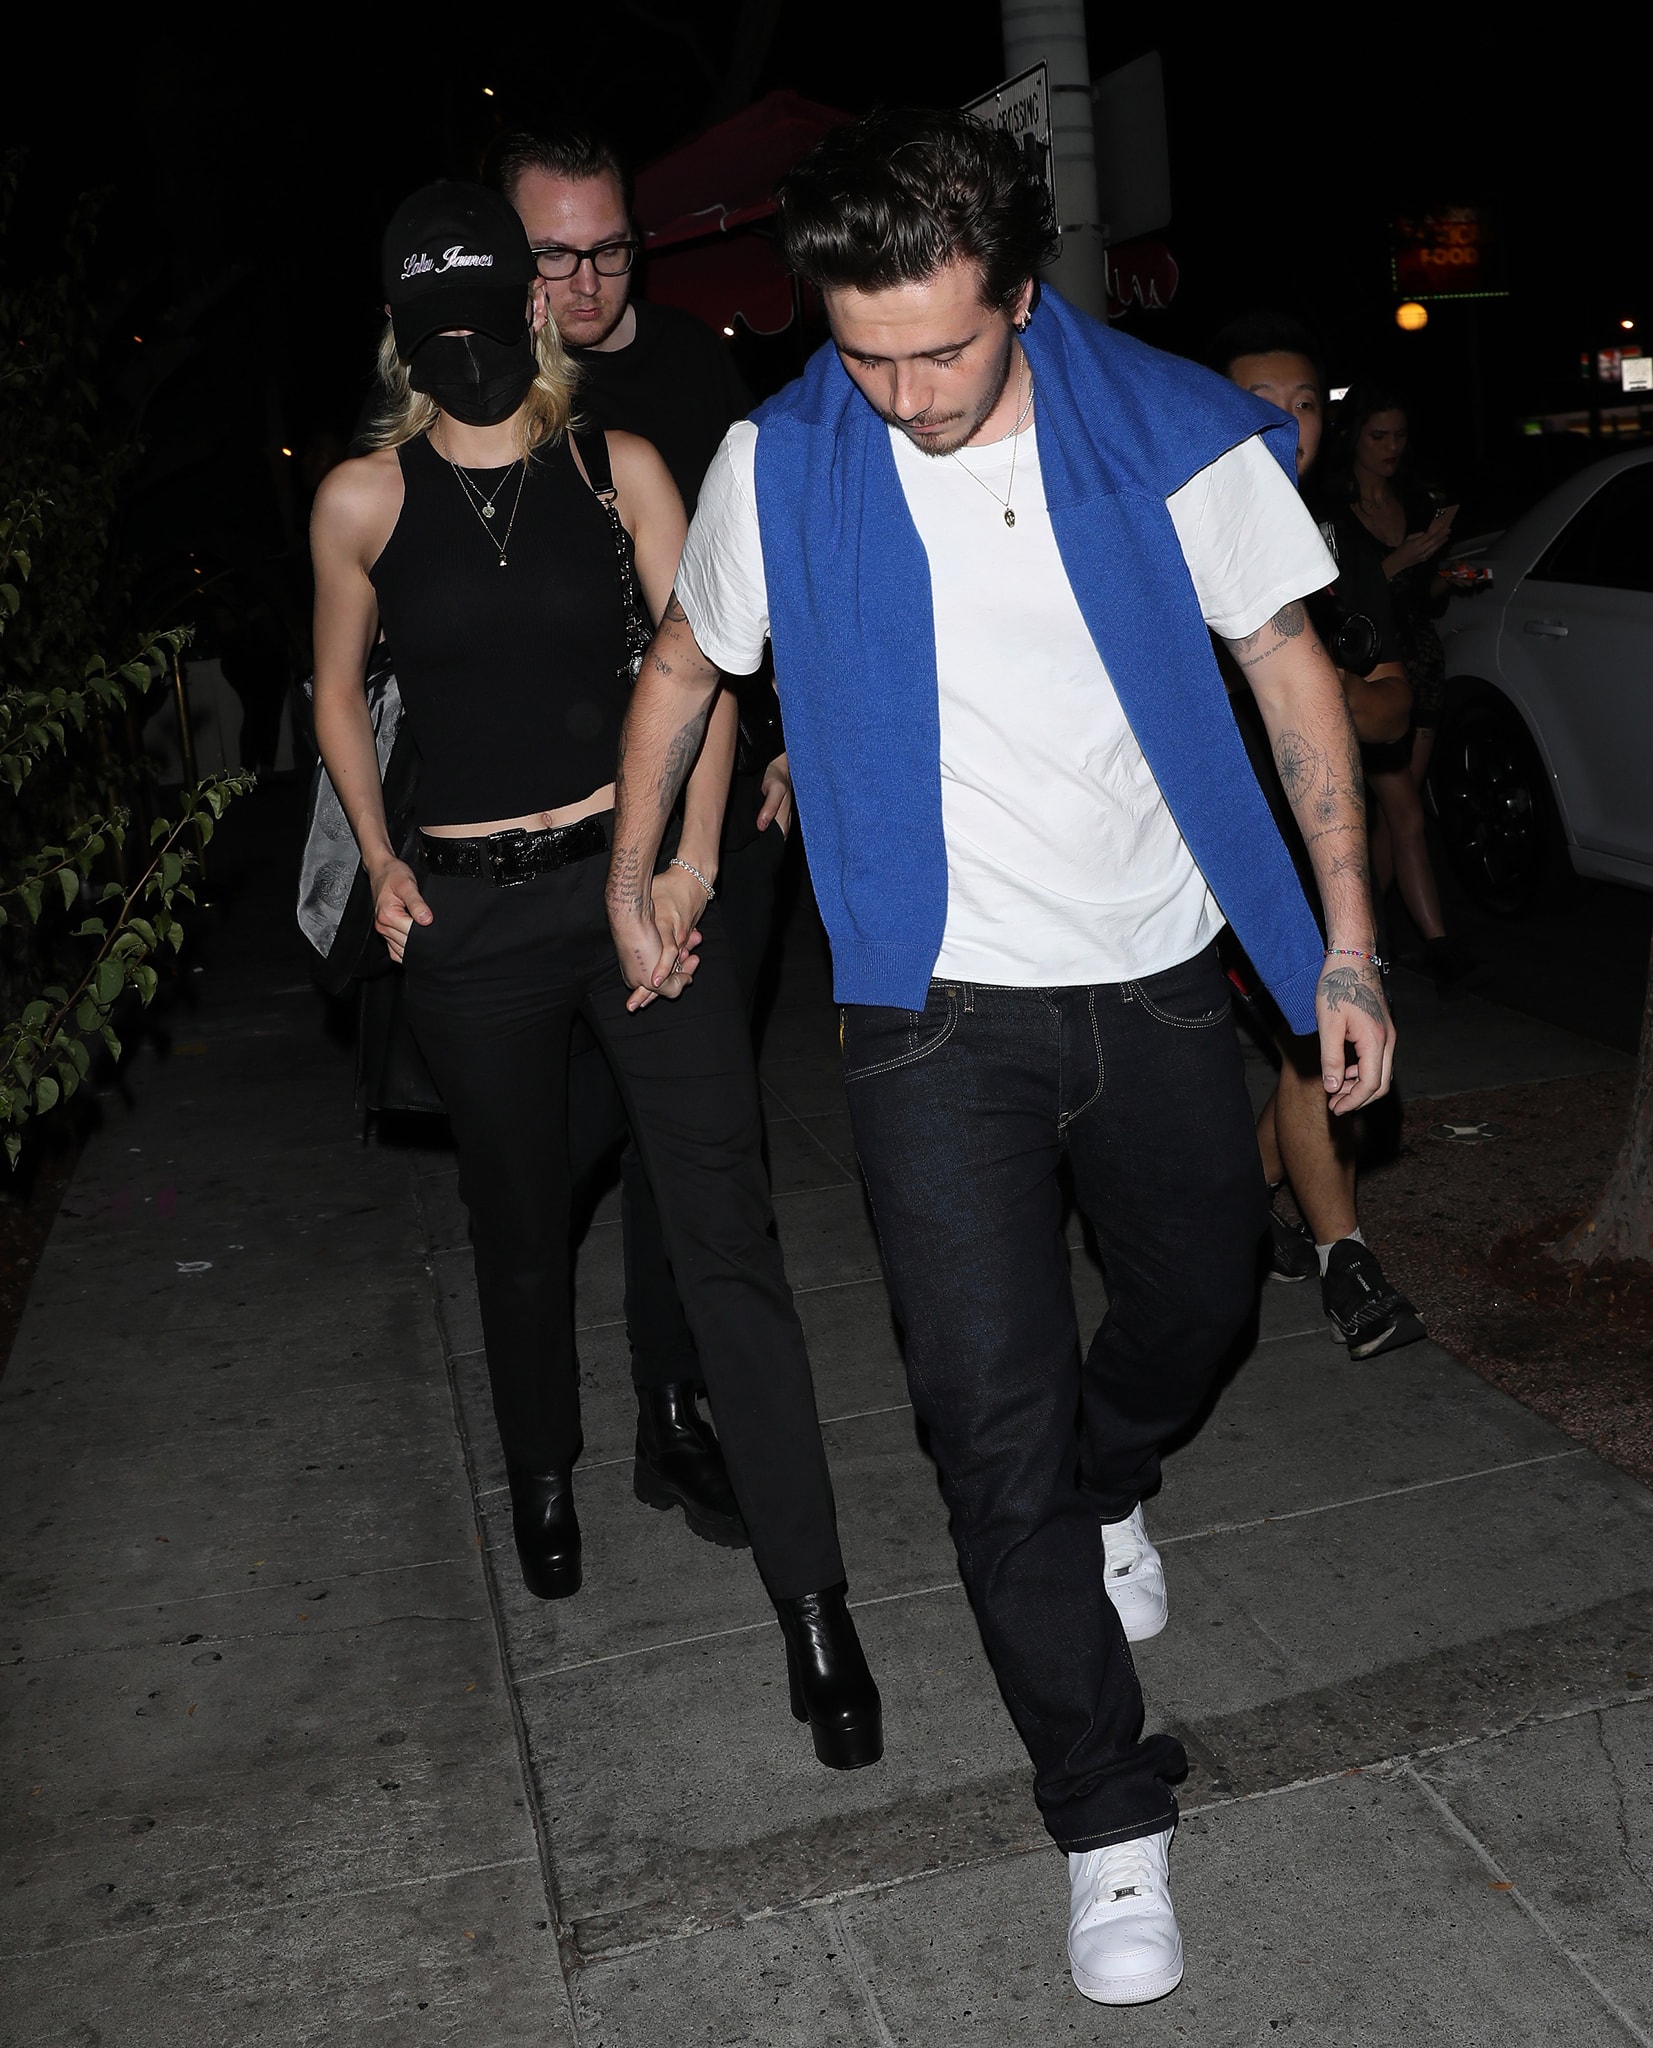 Nicola Peltz and Brooklyn Beckham hold hands while leaving the Delilah restaurant in West Hollywood on August 18, 2021